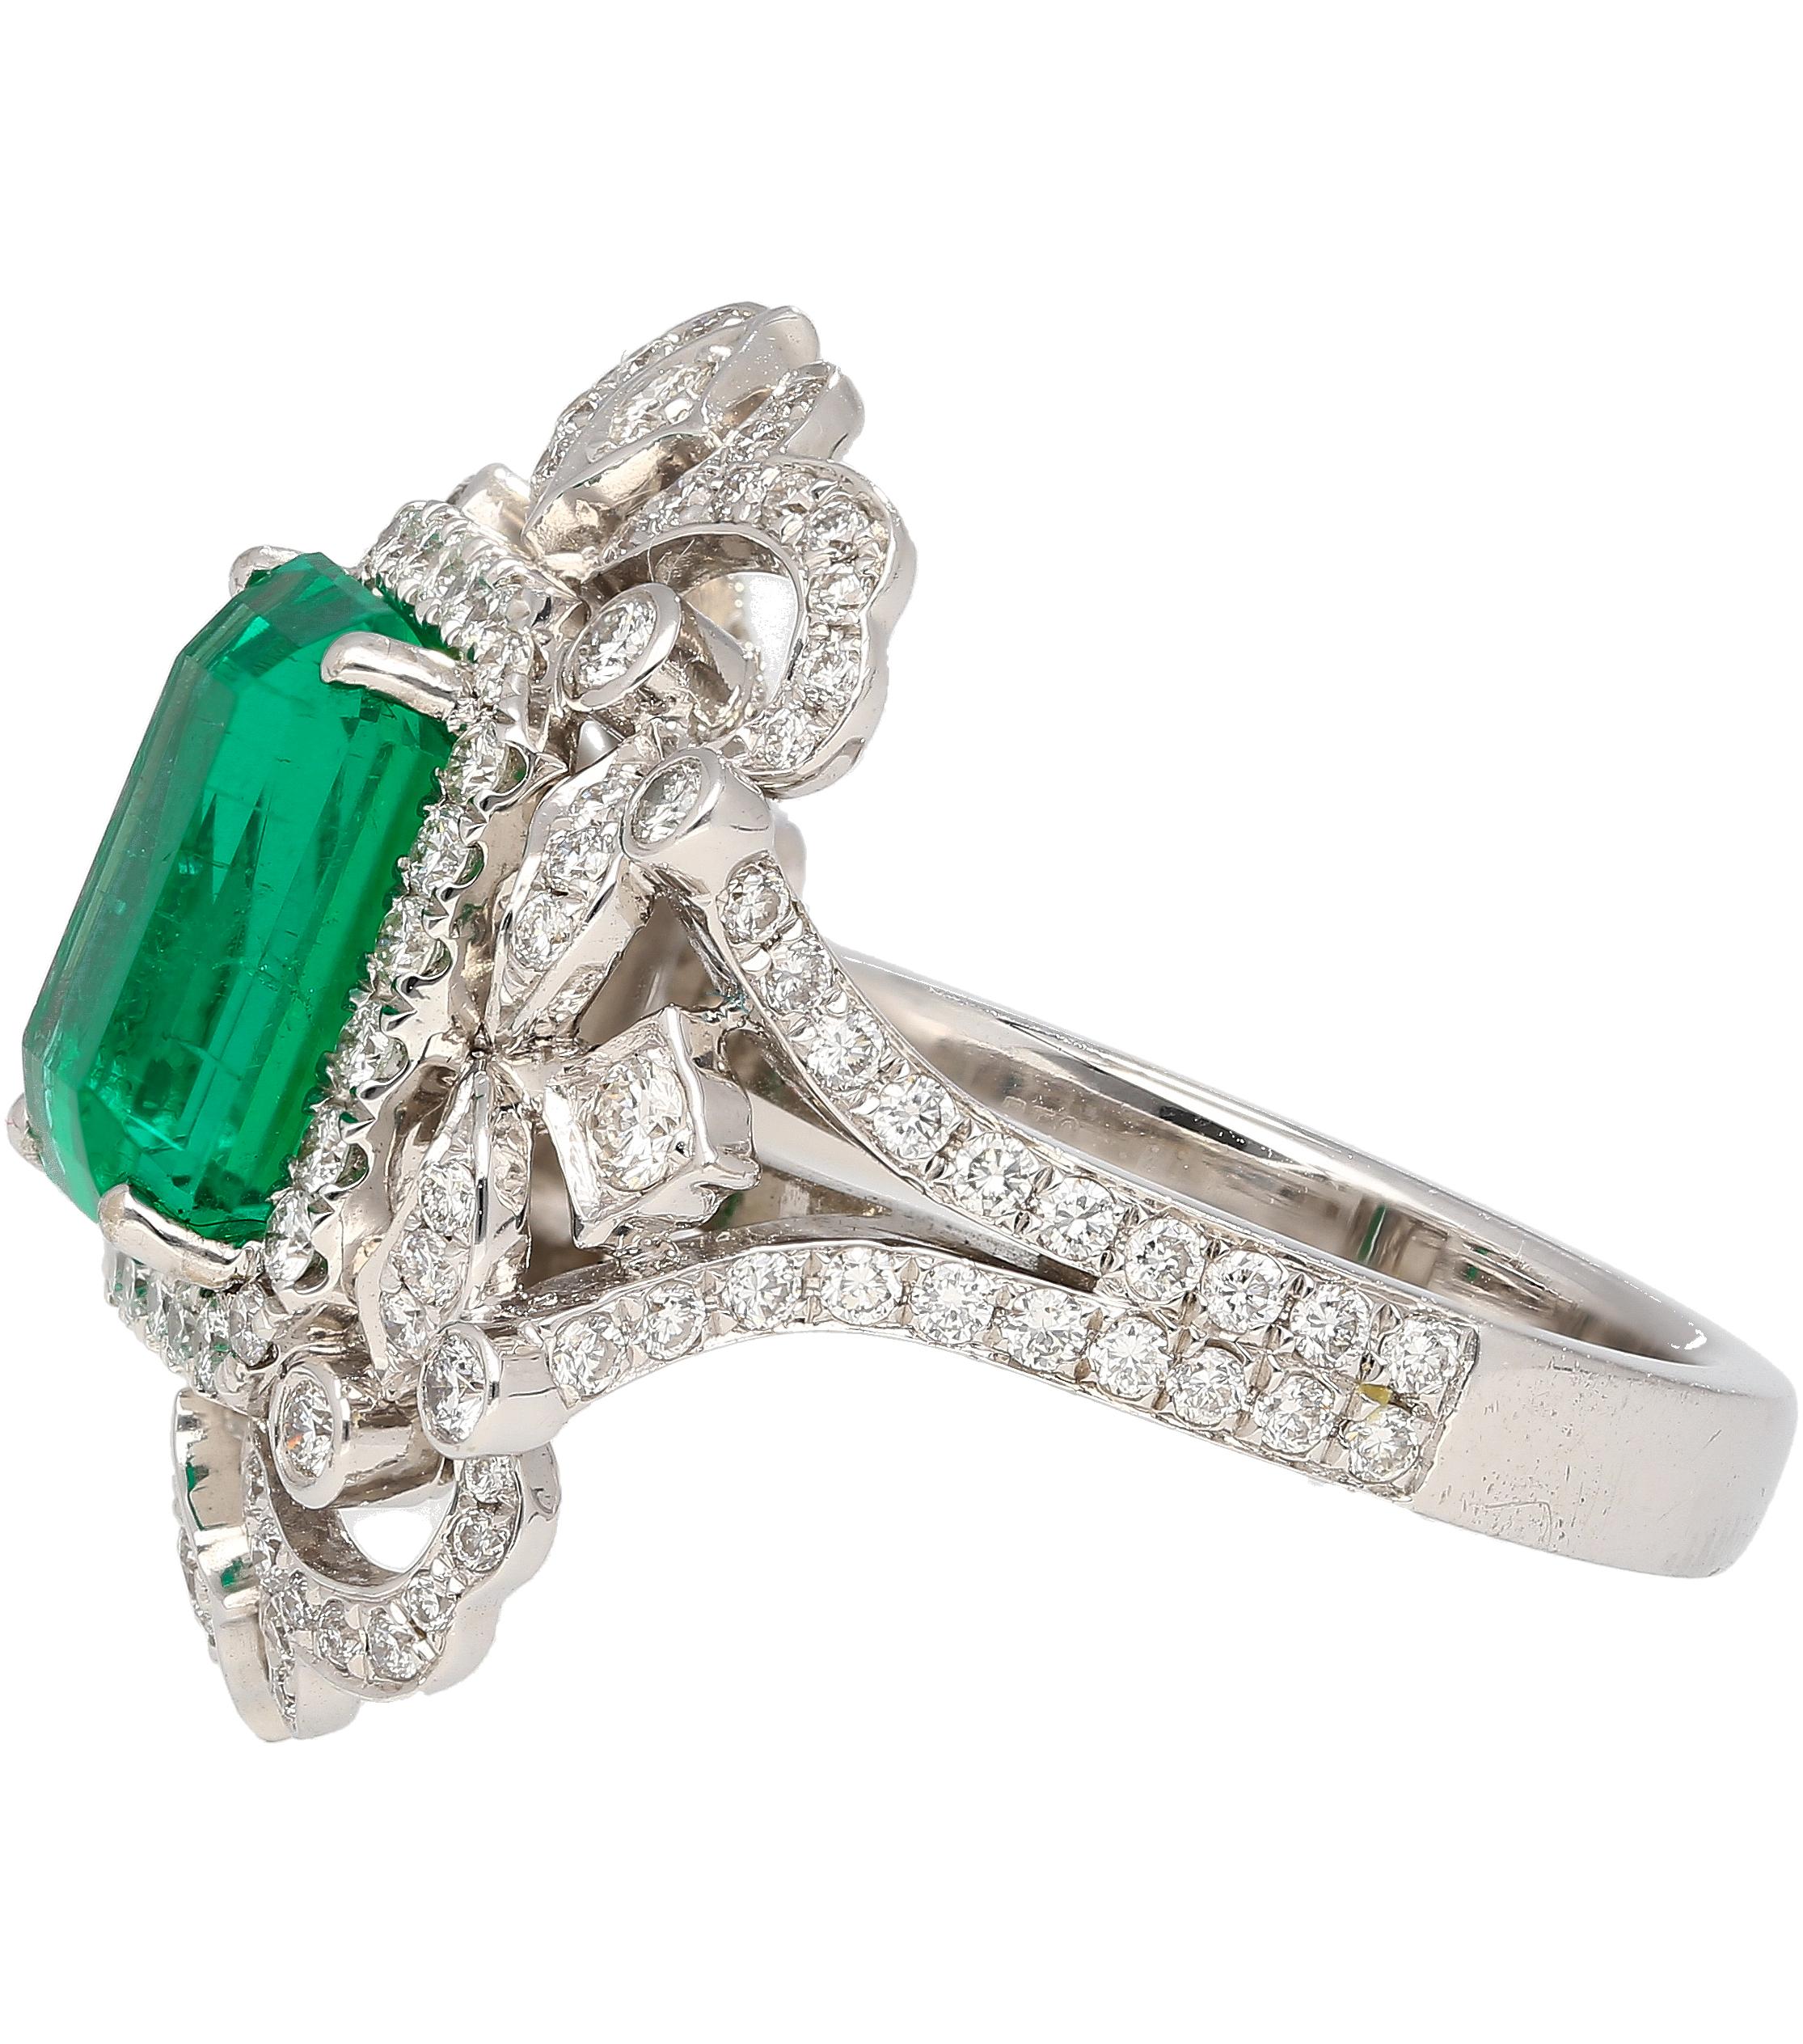 GIA Certified 3.75 Carat Colombian Emerald in 18k White Gold Art Deco Ring For Sale 1